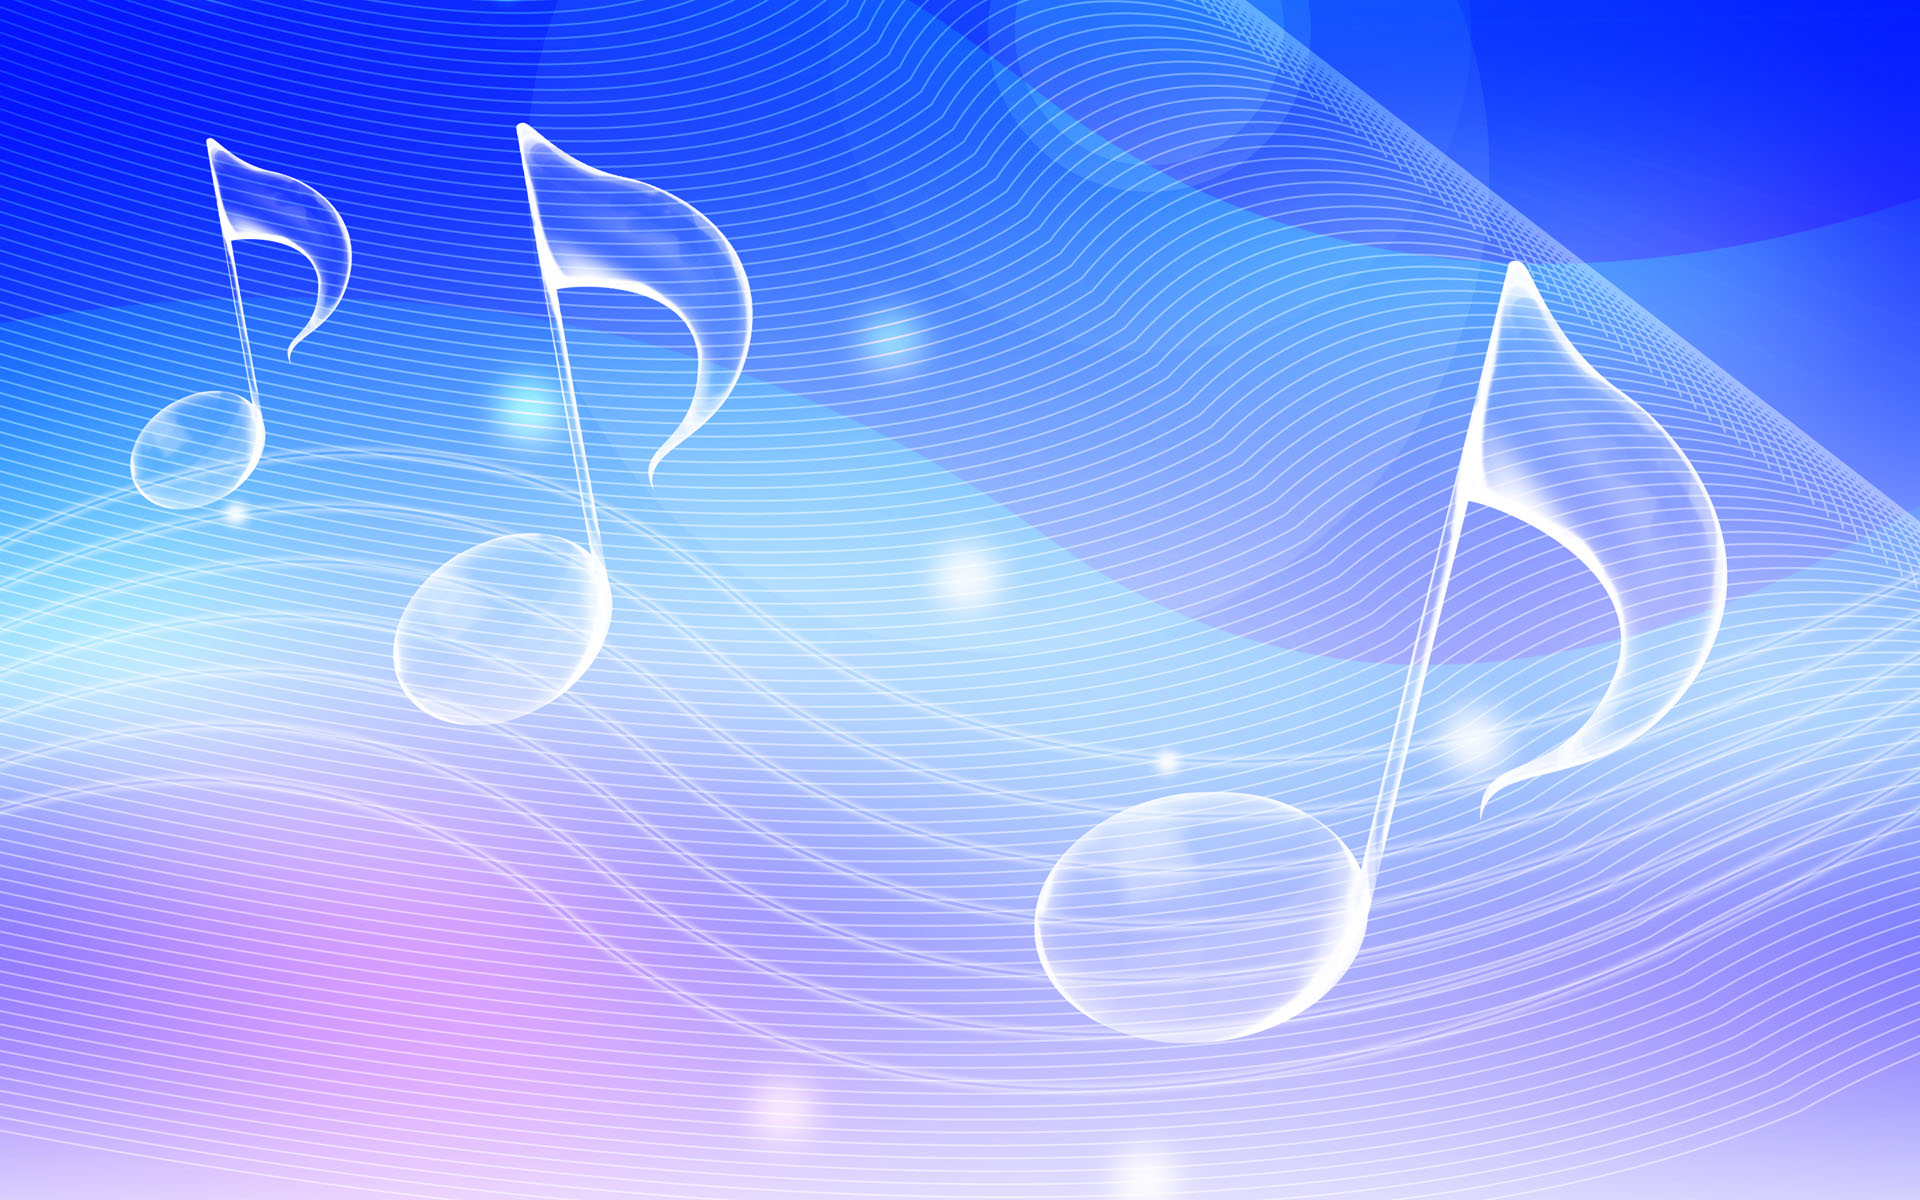 Music Pictures Free - Desktop Backgrounds